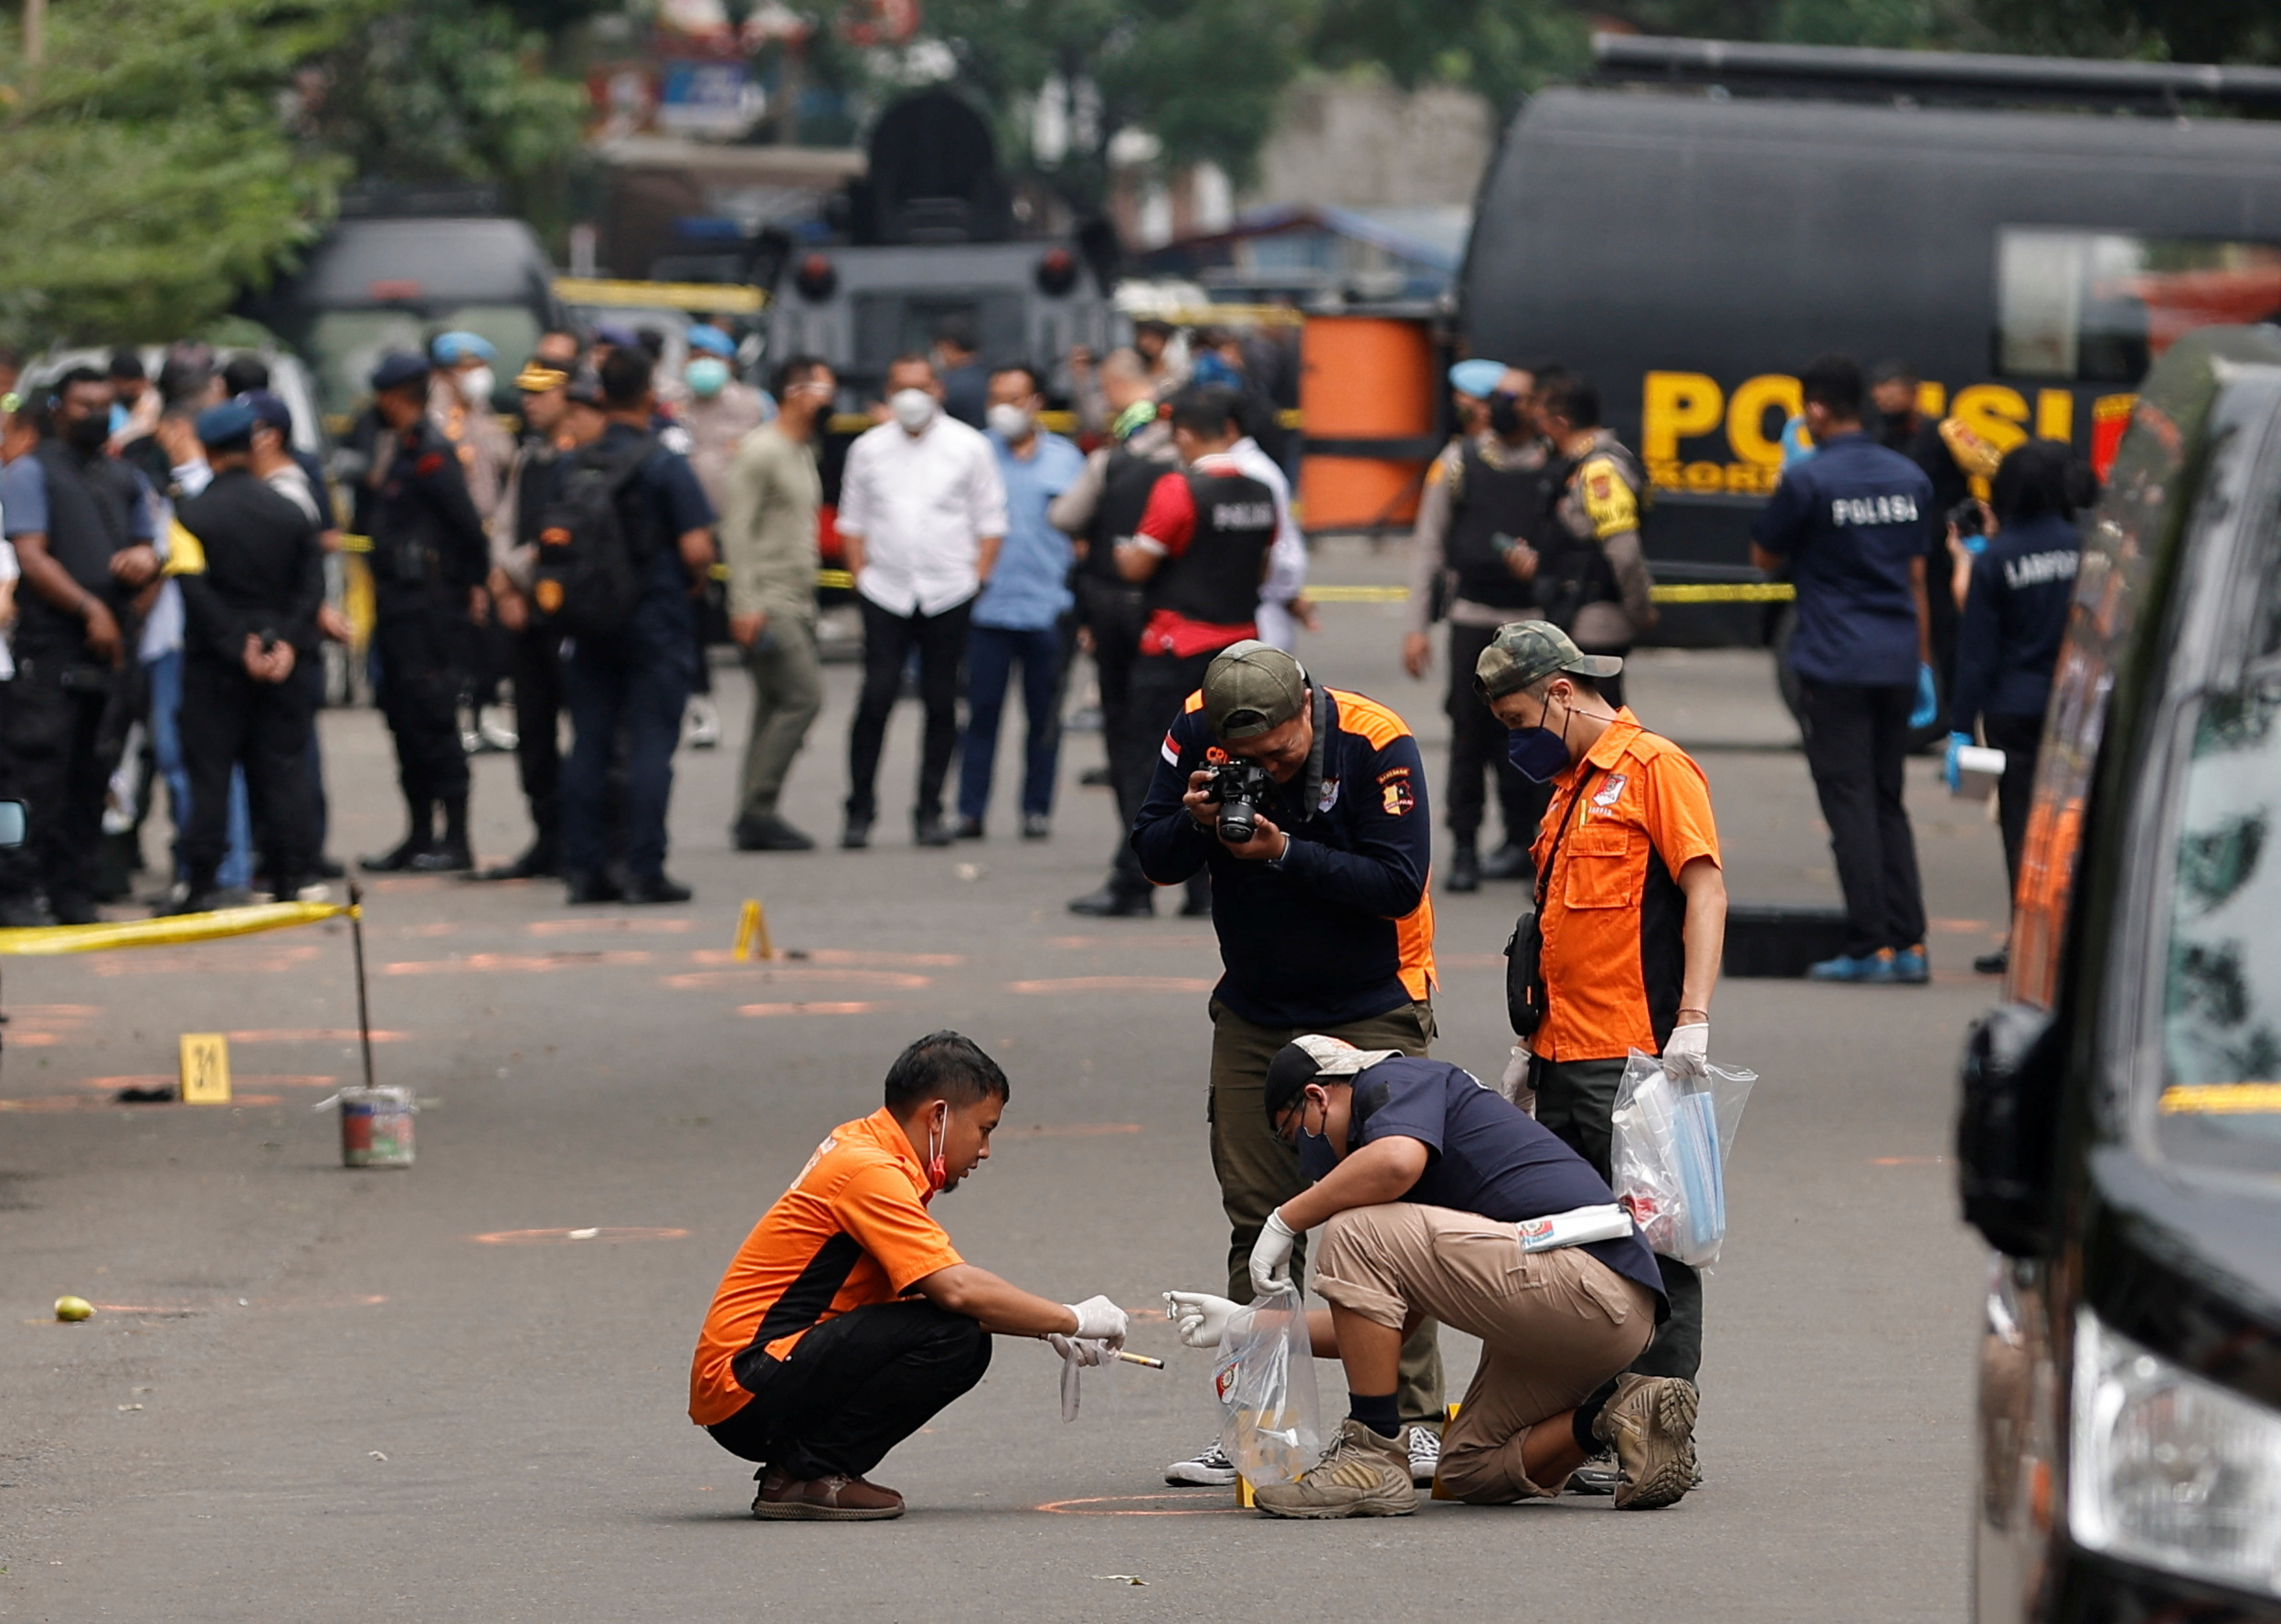 After the explosion at the district police station in Bandung